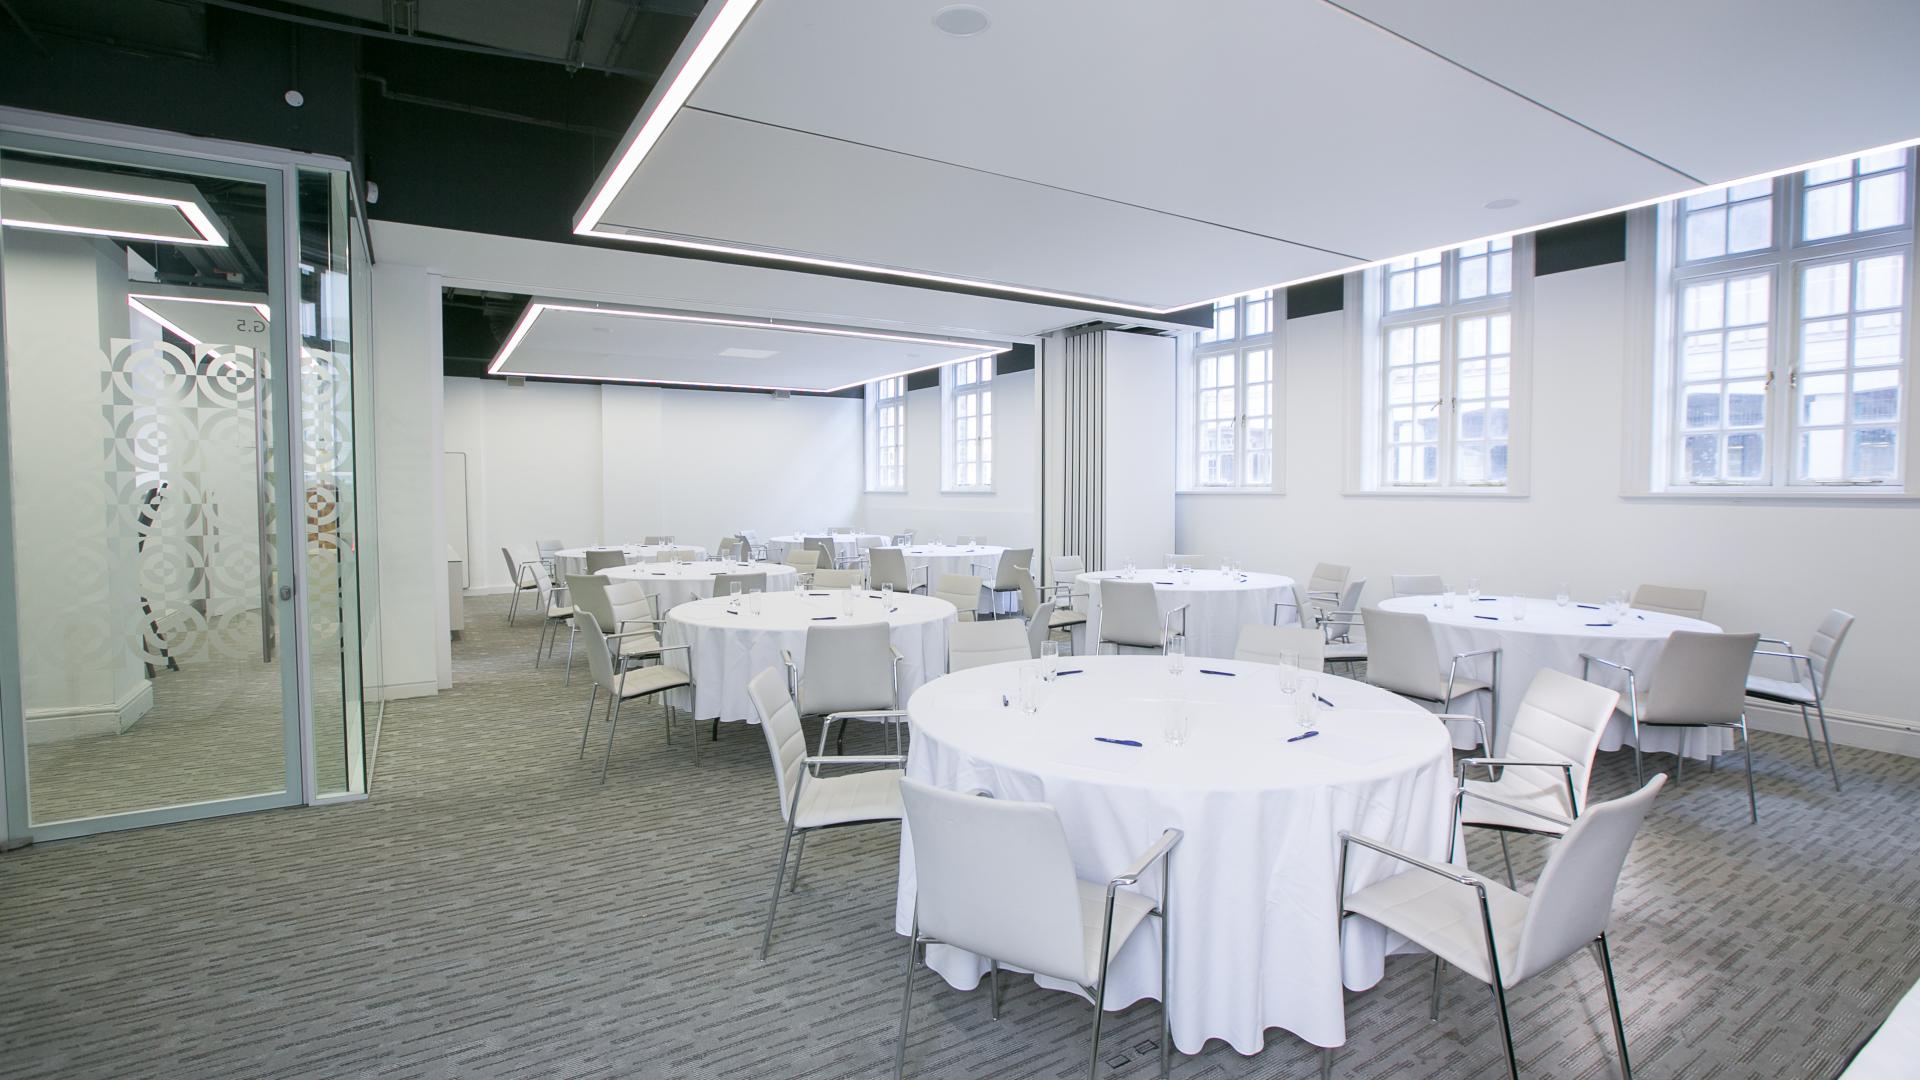 Find your Conference Venue in Euston